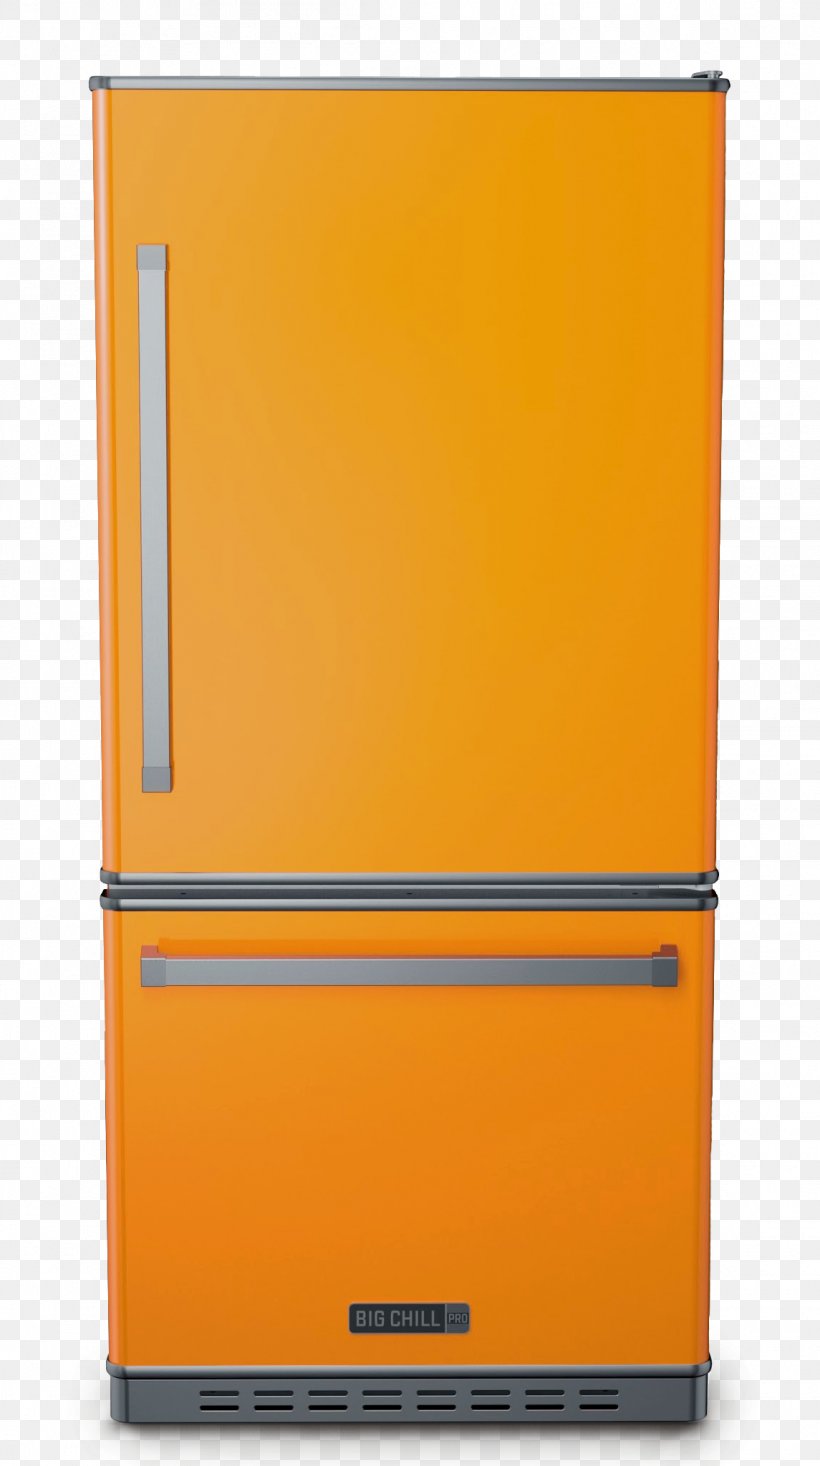 Home Appliance Refrigerator Clip Art, PNG, 1145x2048px, Home Appliance, Cooking Ranges, Digital Image, Image File Formats, Image Resolution Download Free